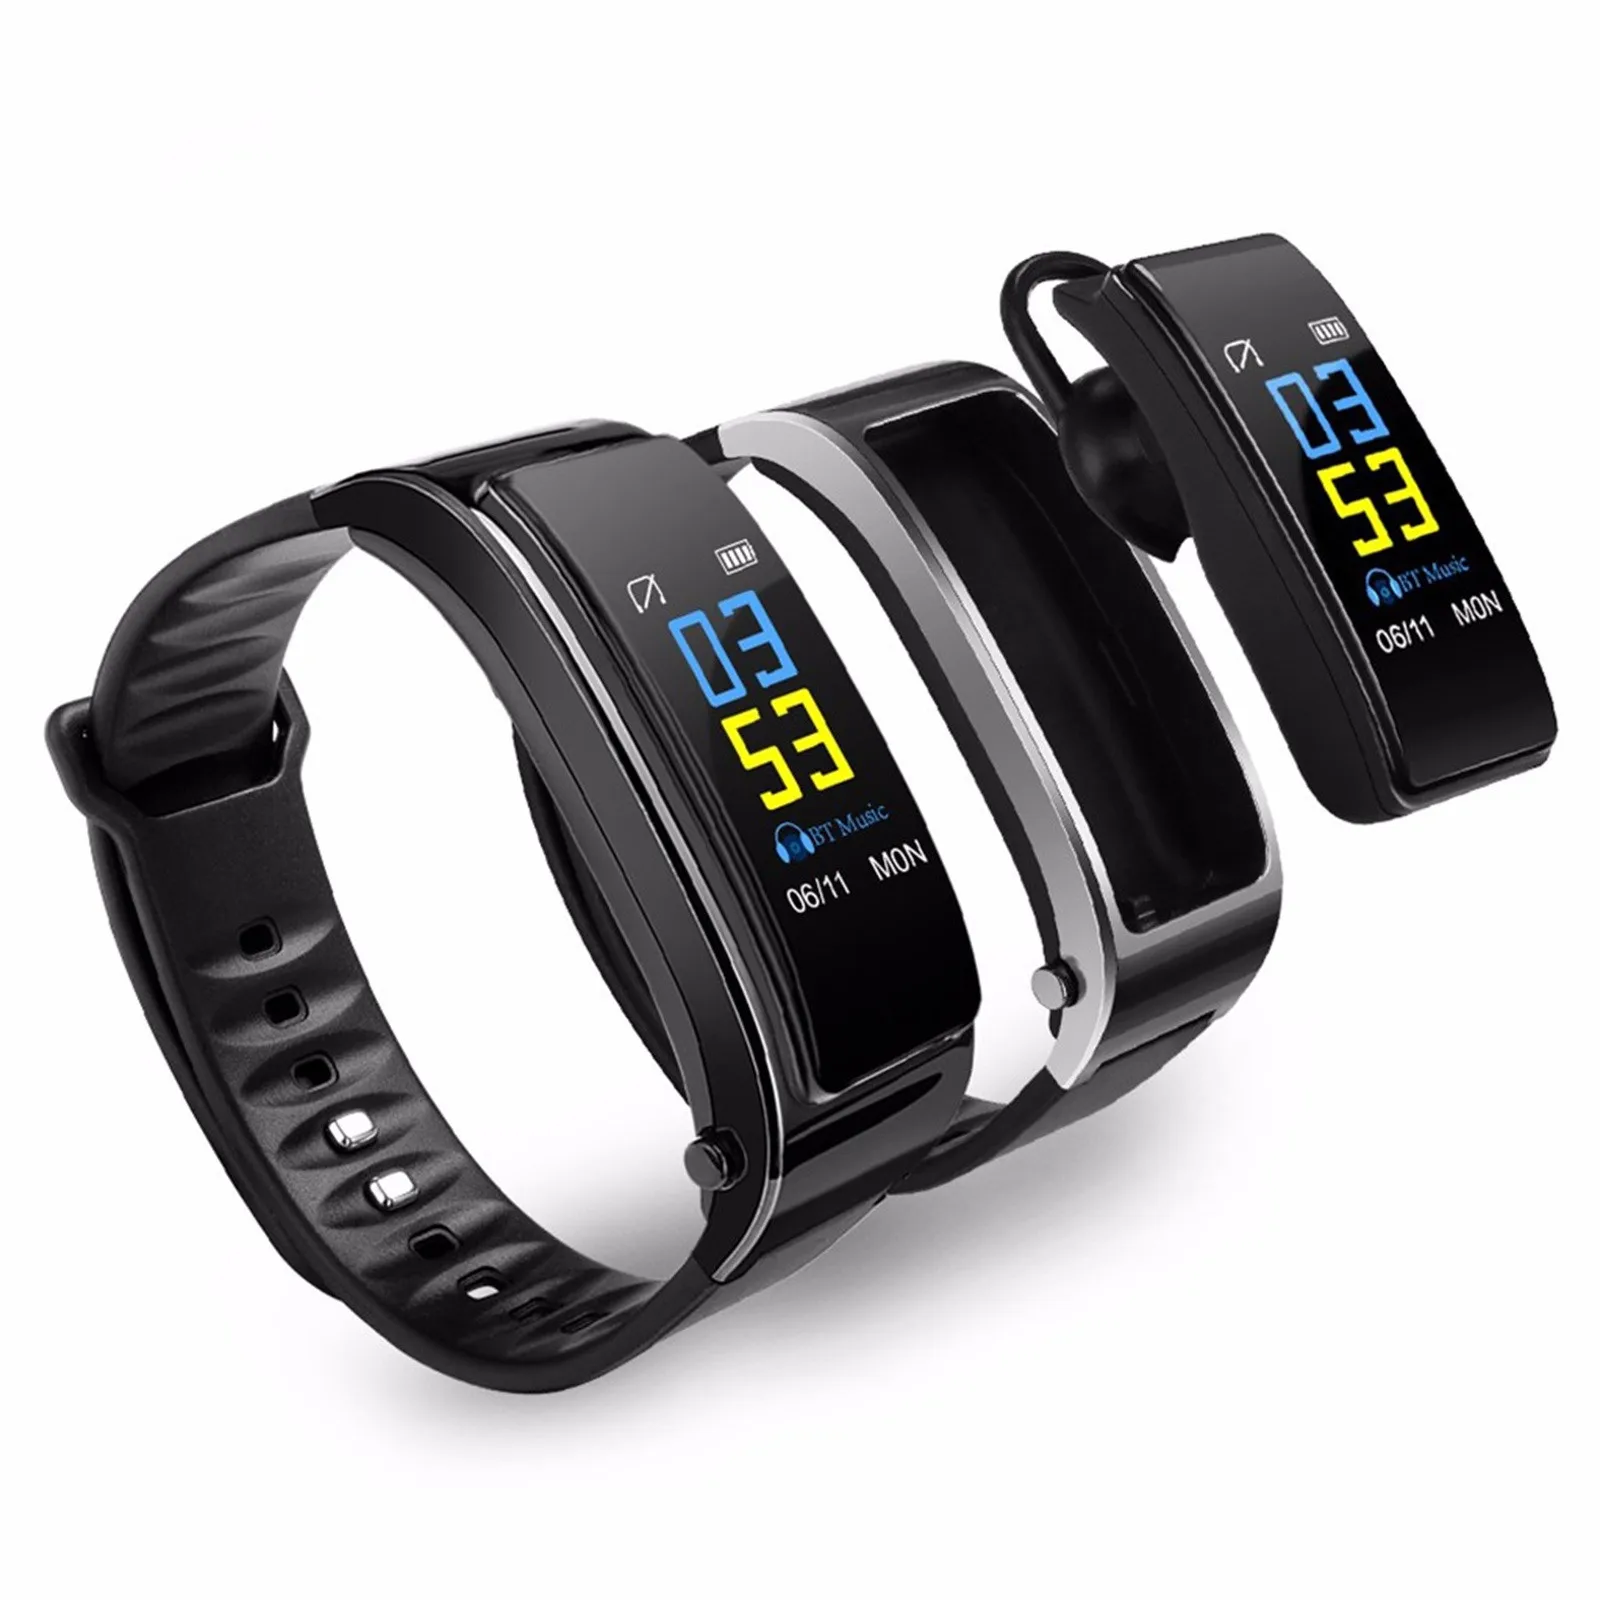 

new Y3 PLUS Bluetooth Headset Smart Bracelet 2 in 1 watch with earbuds Wristband health monitoring Sports Earphone and Mic